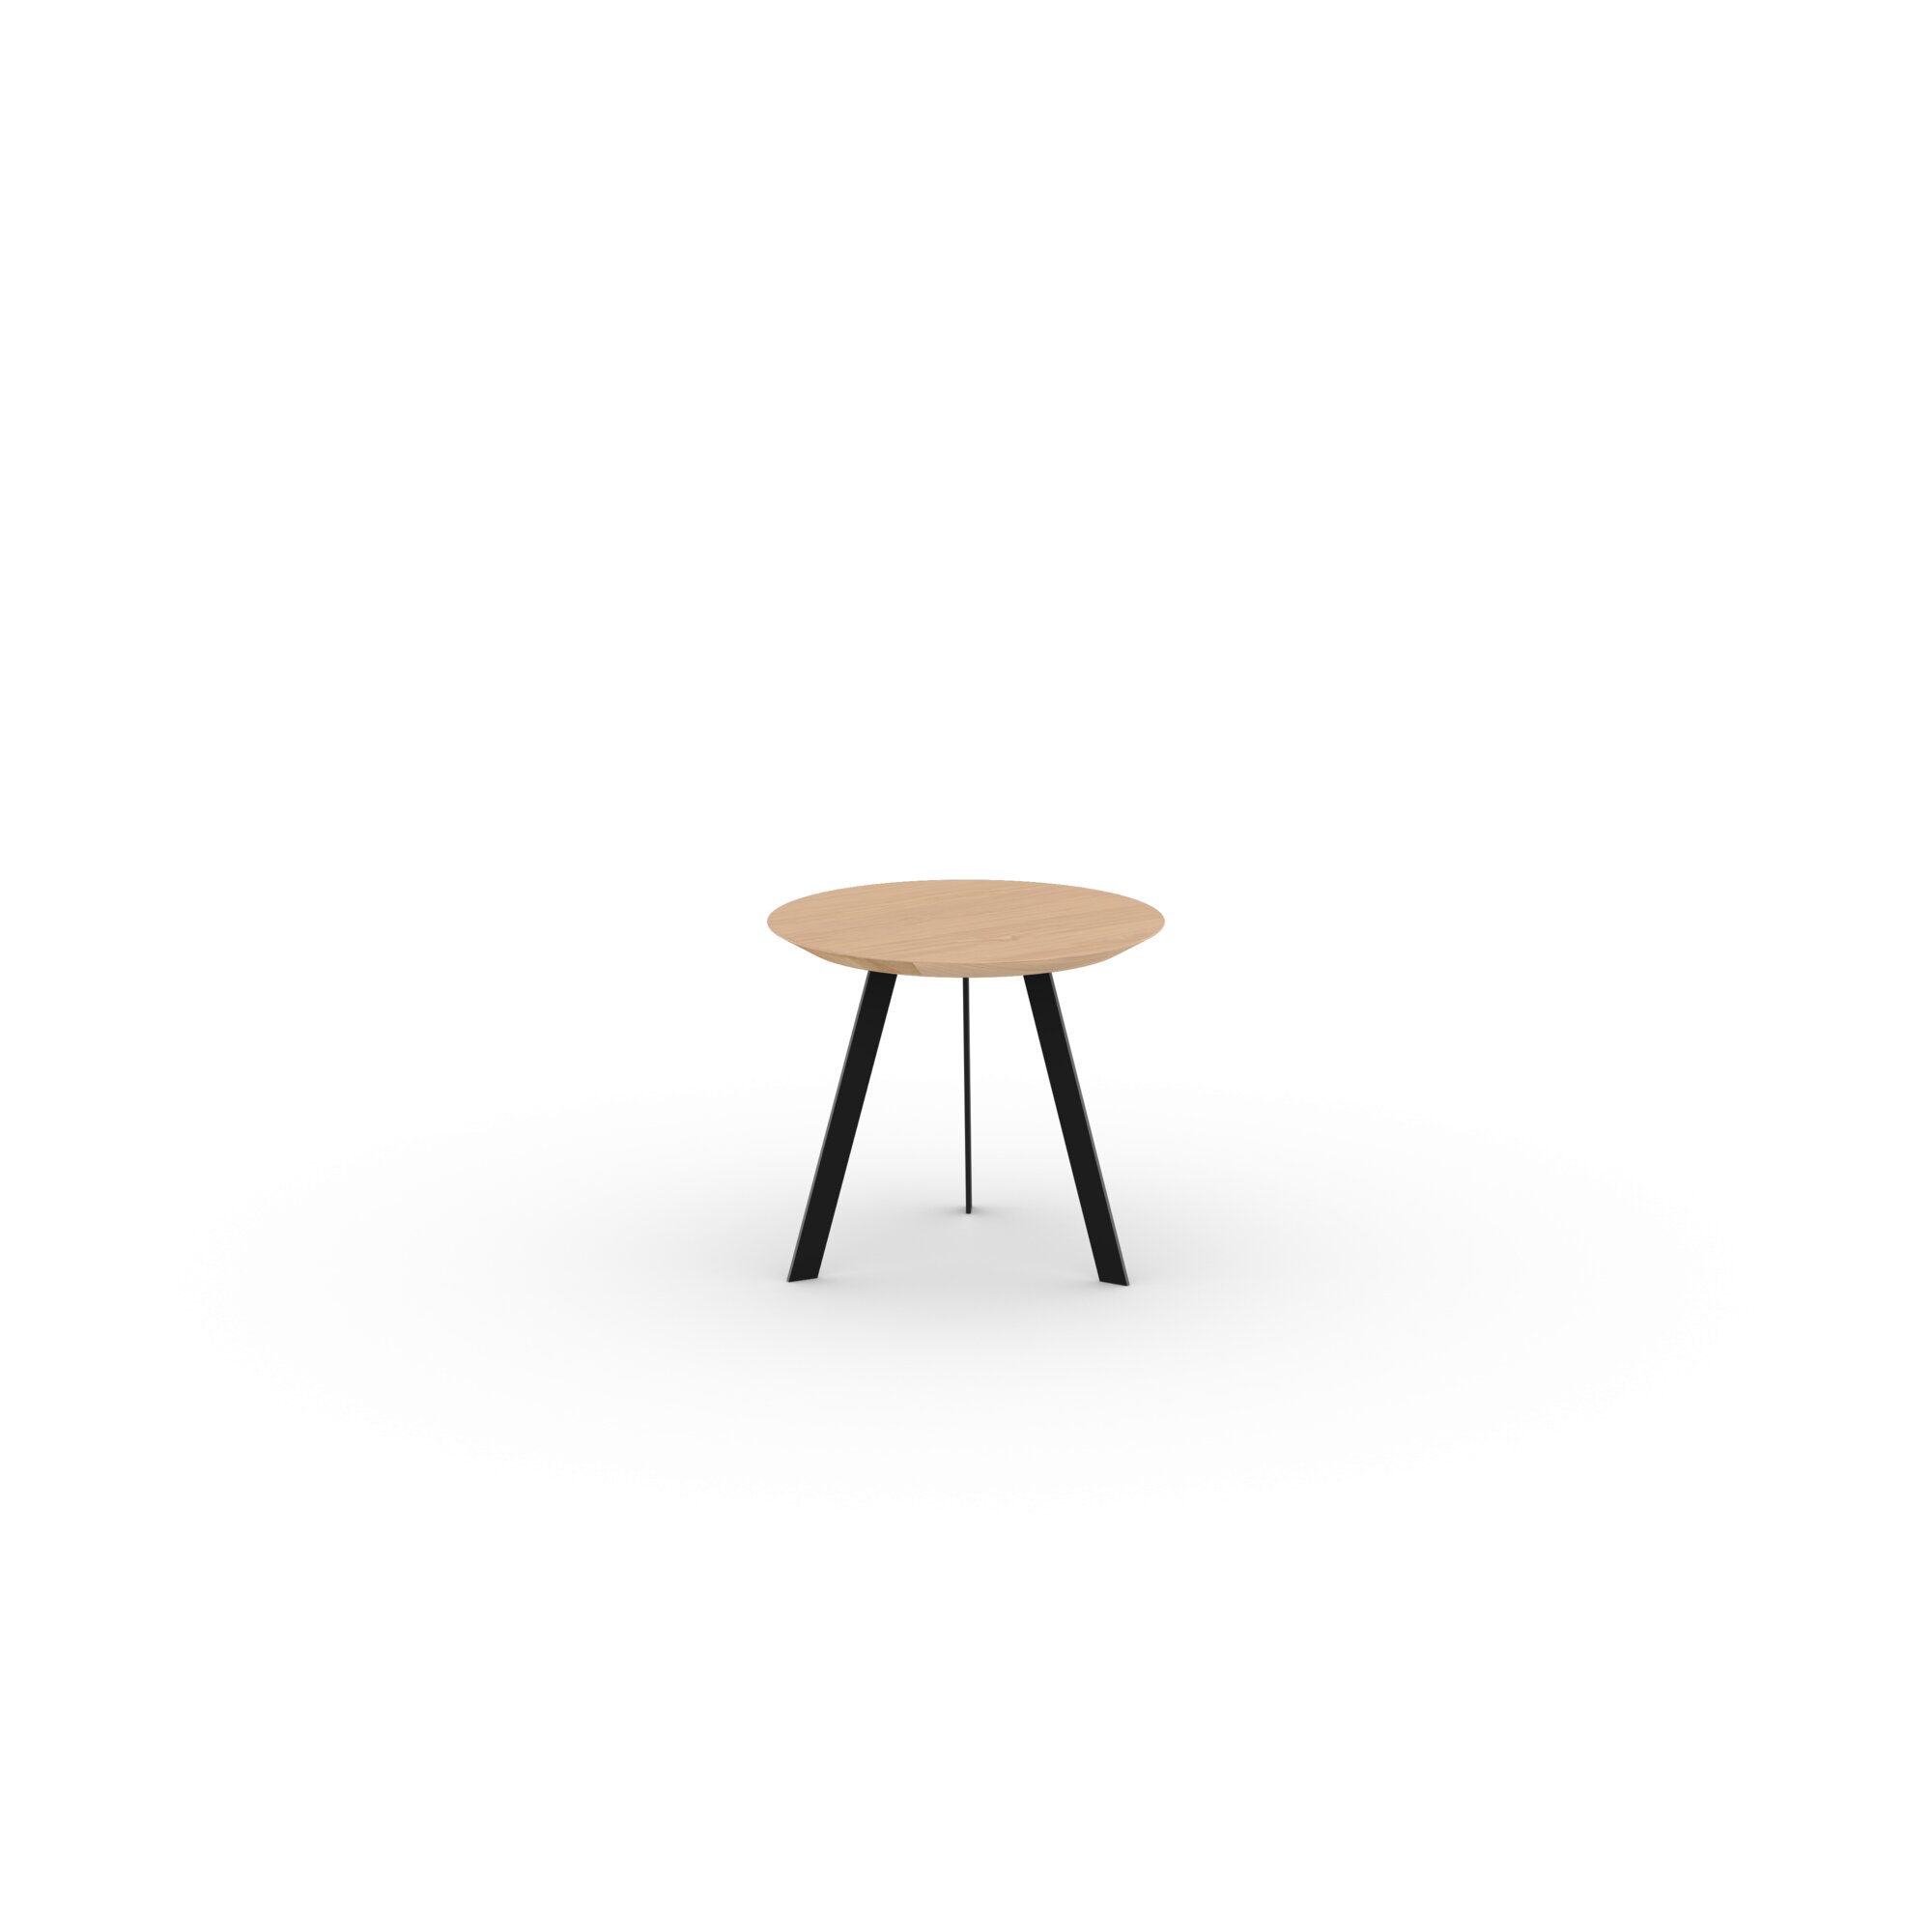 Design Coffee Table | New Co Coffee Table 50 Round Black | Oak hardwax oil natural light 3041 | Studio HENK| 